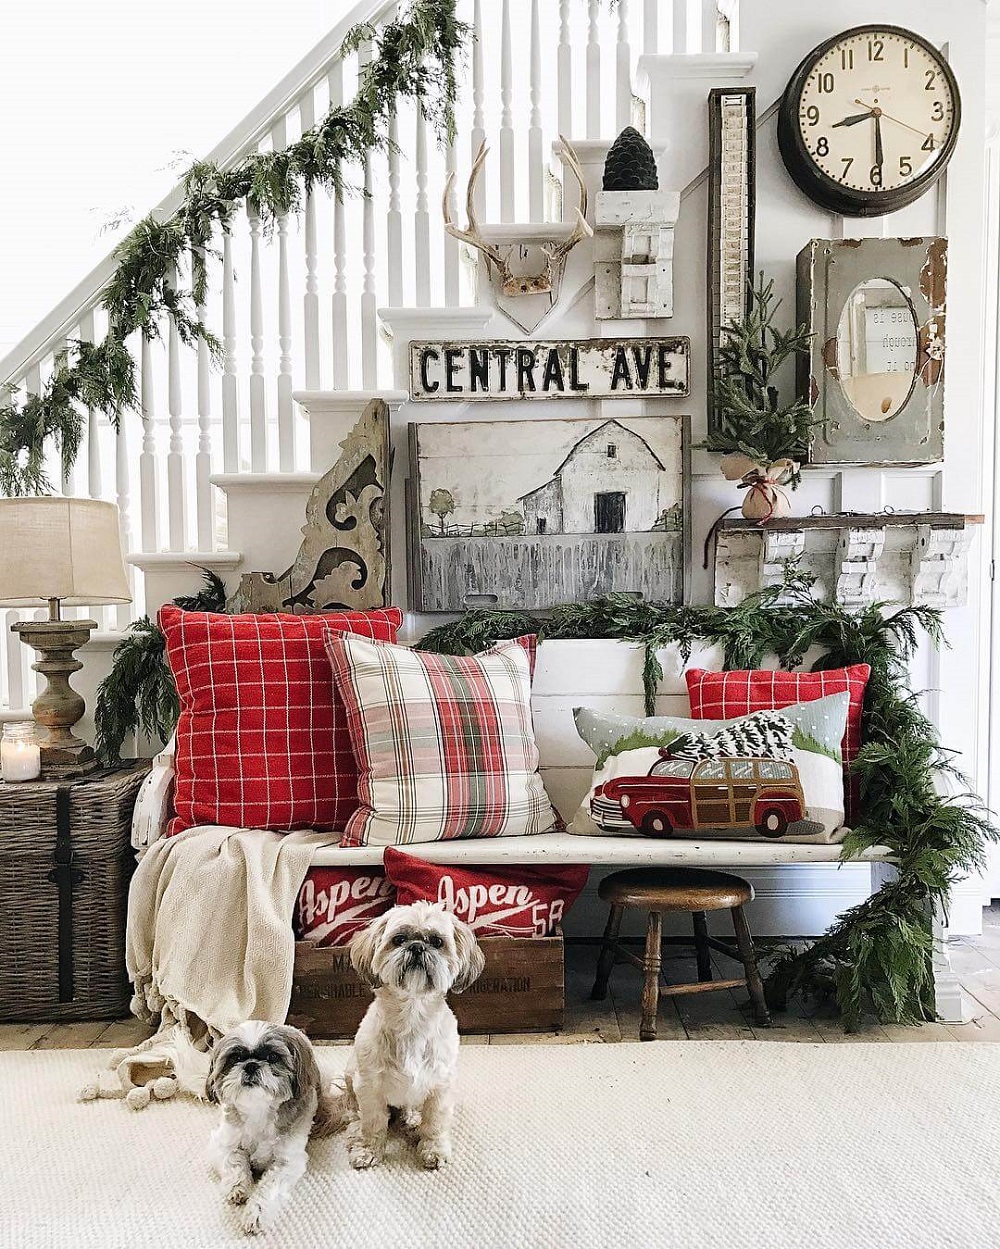 t4-5 Christmas living room decorations you must try in the holiday season